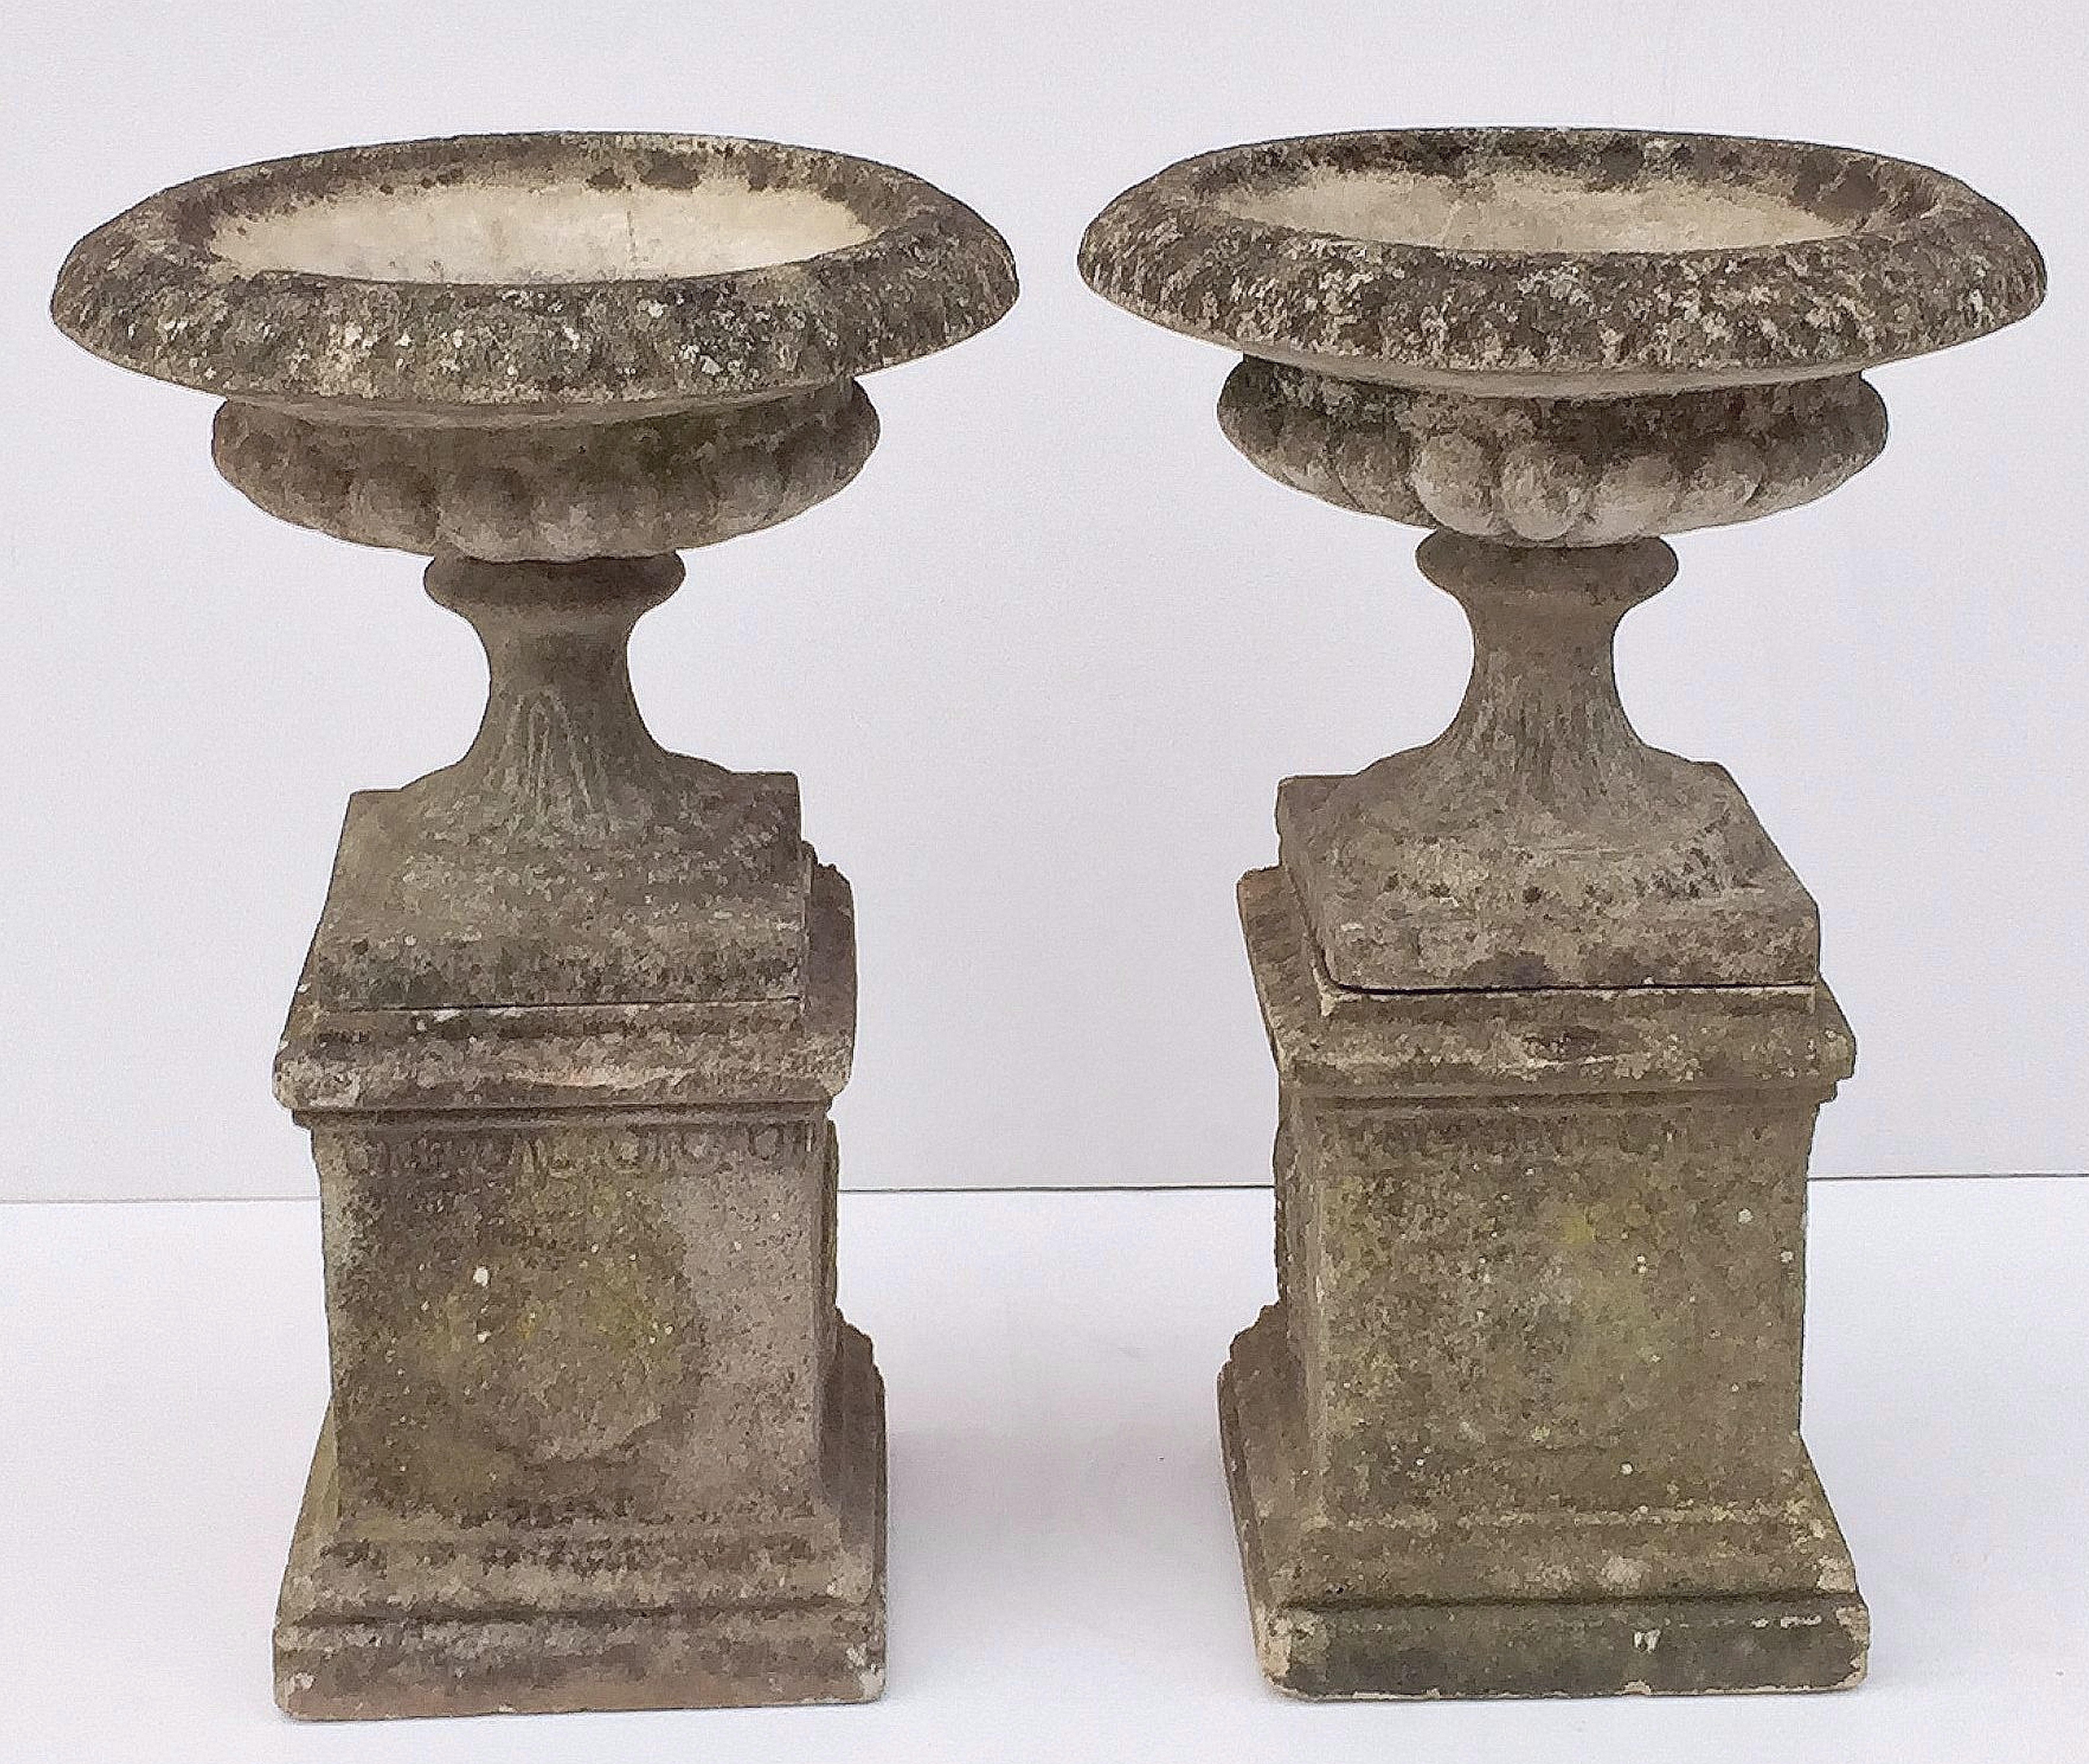 A fine pair of English garden urns (or planters) in the Classical style, of composition stone, on raised square plinths or stands.
Each urn featuring a rolled rim edge over a lobed bowl with fluted column and square base, each set upon a square